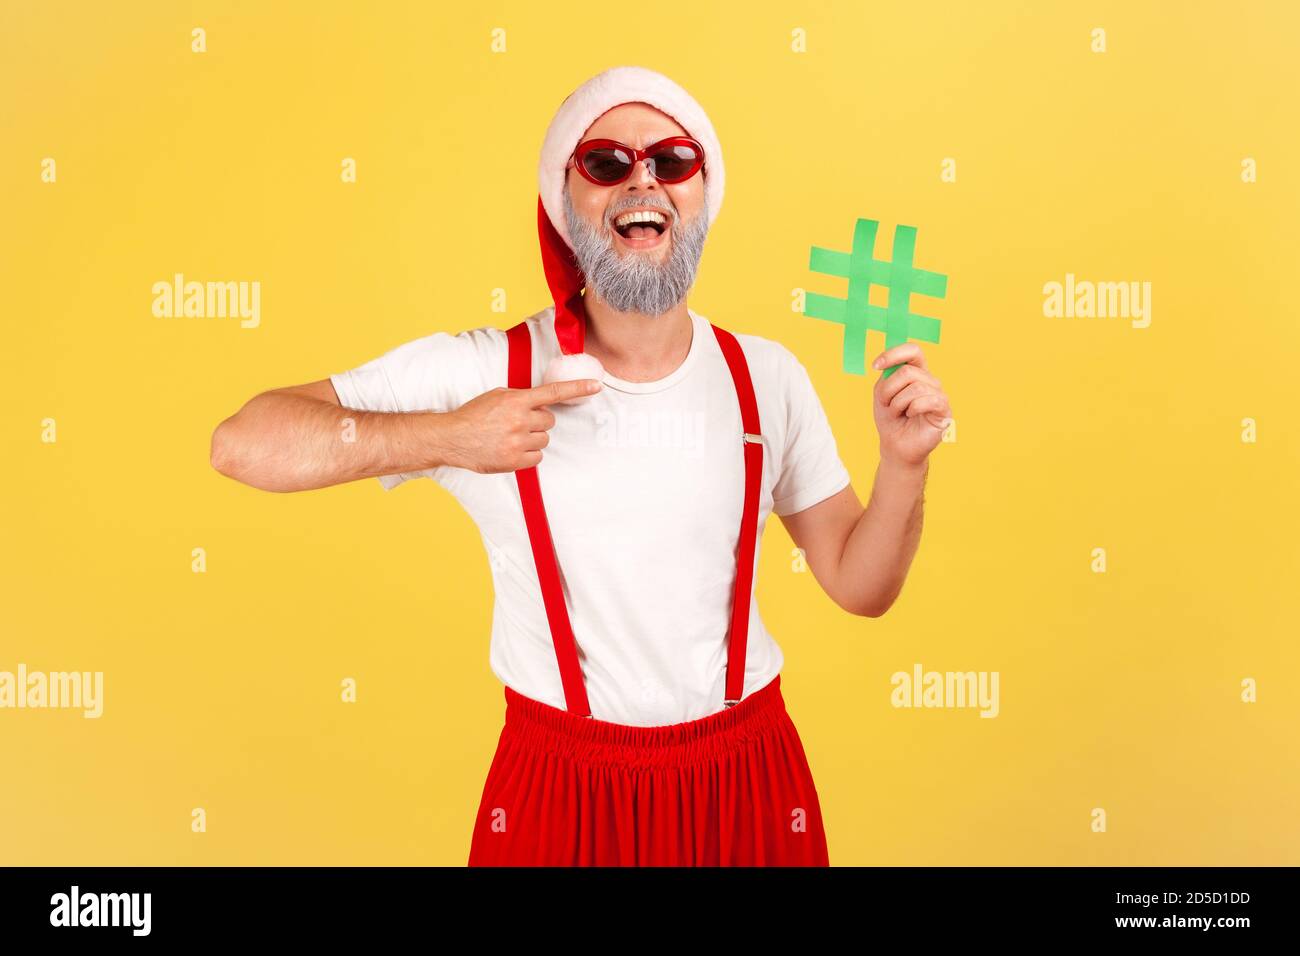 Happy smiling gray bearded man in sunglasses and santa claus hat pointing at green hashtag symbol in his hand, tagging holiday posts. Indoor studio sh Stock Photo